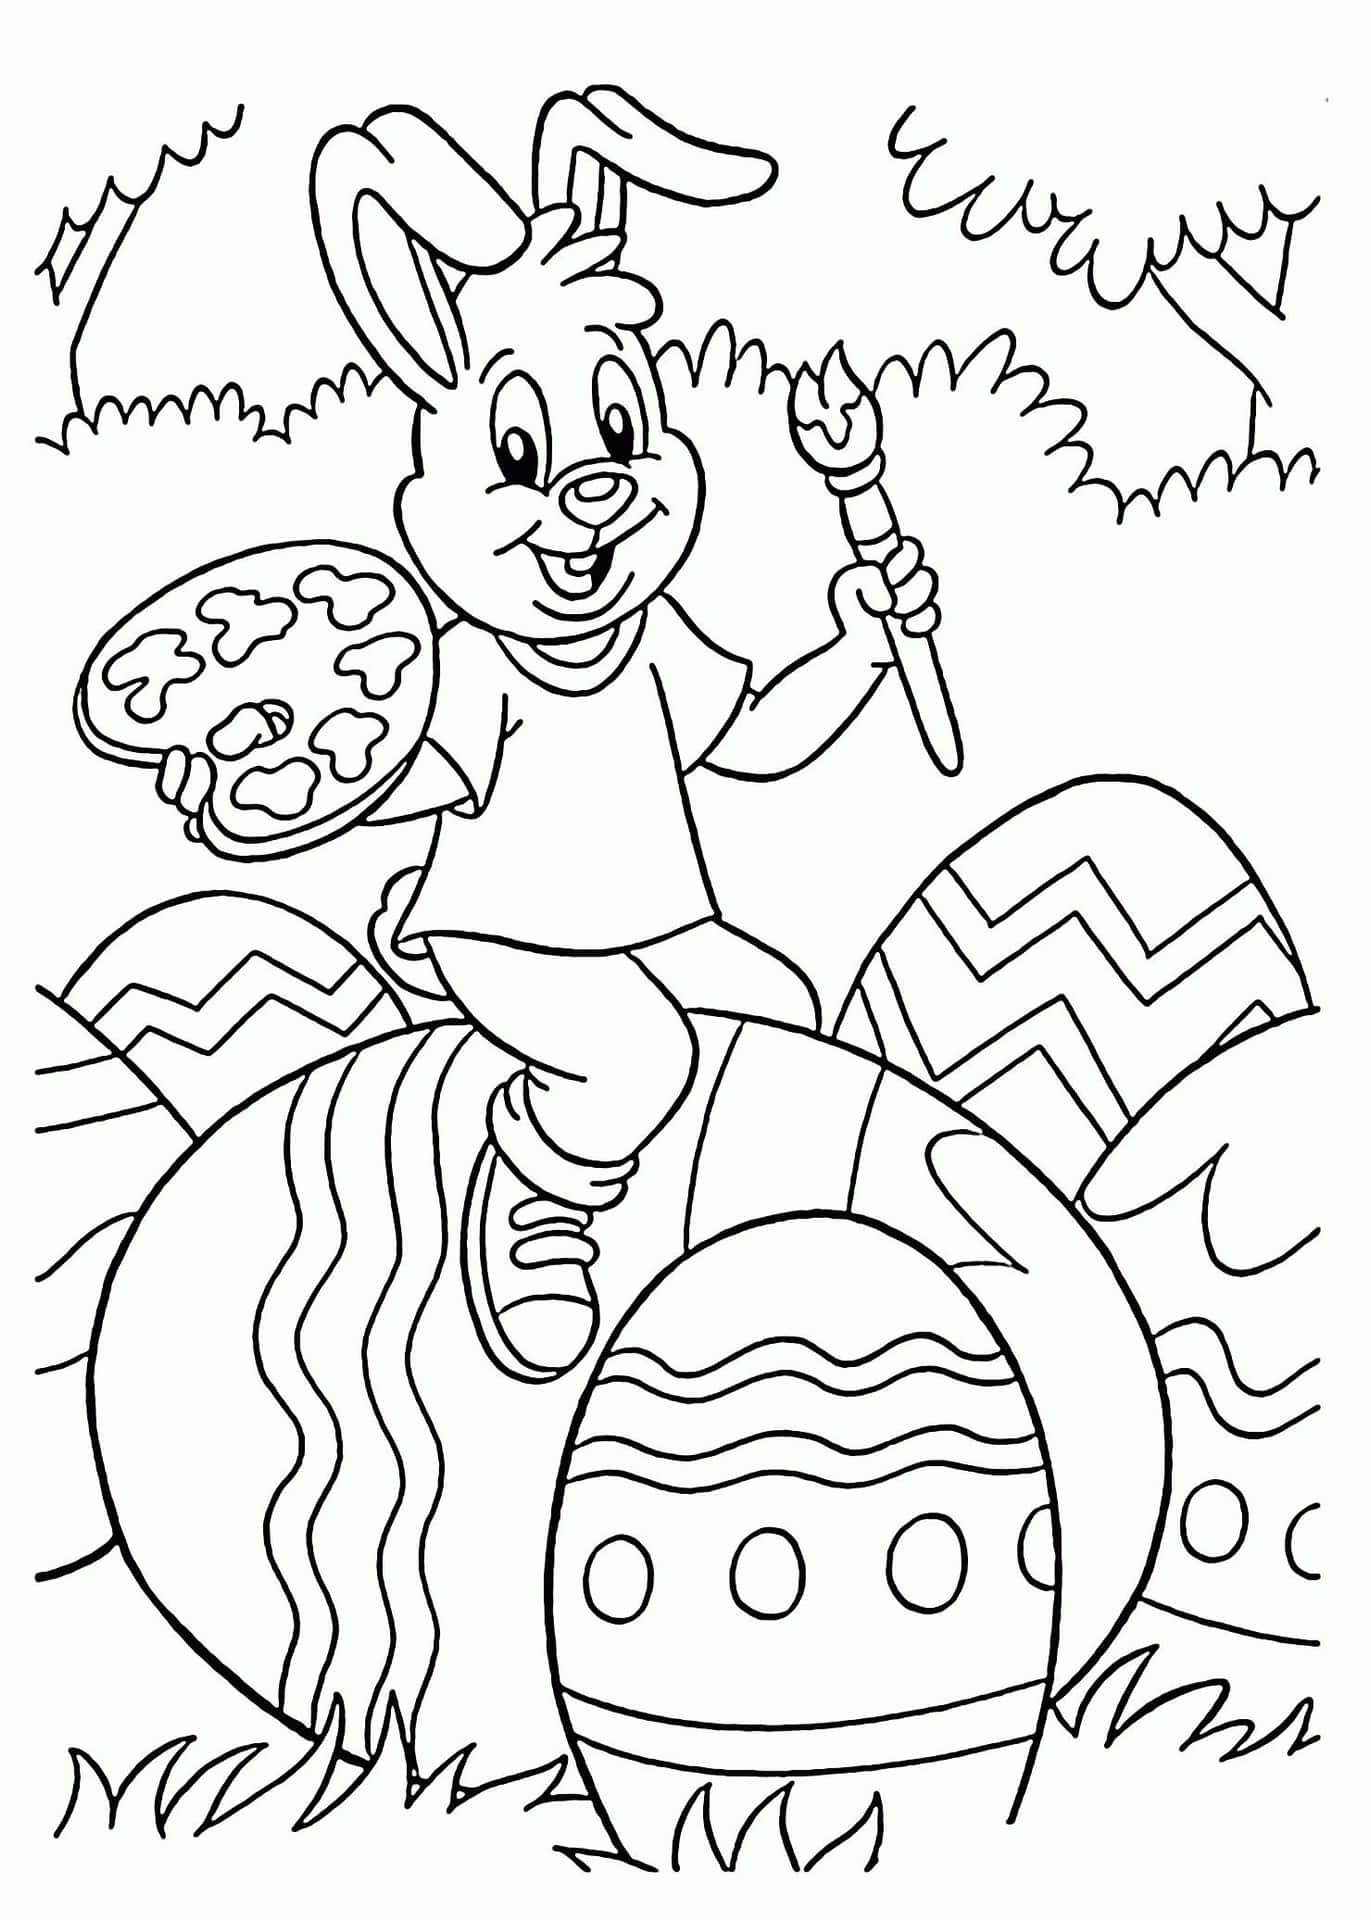 Bunny Painting Eggs Easter Coloring Picture